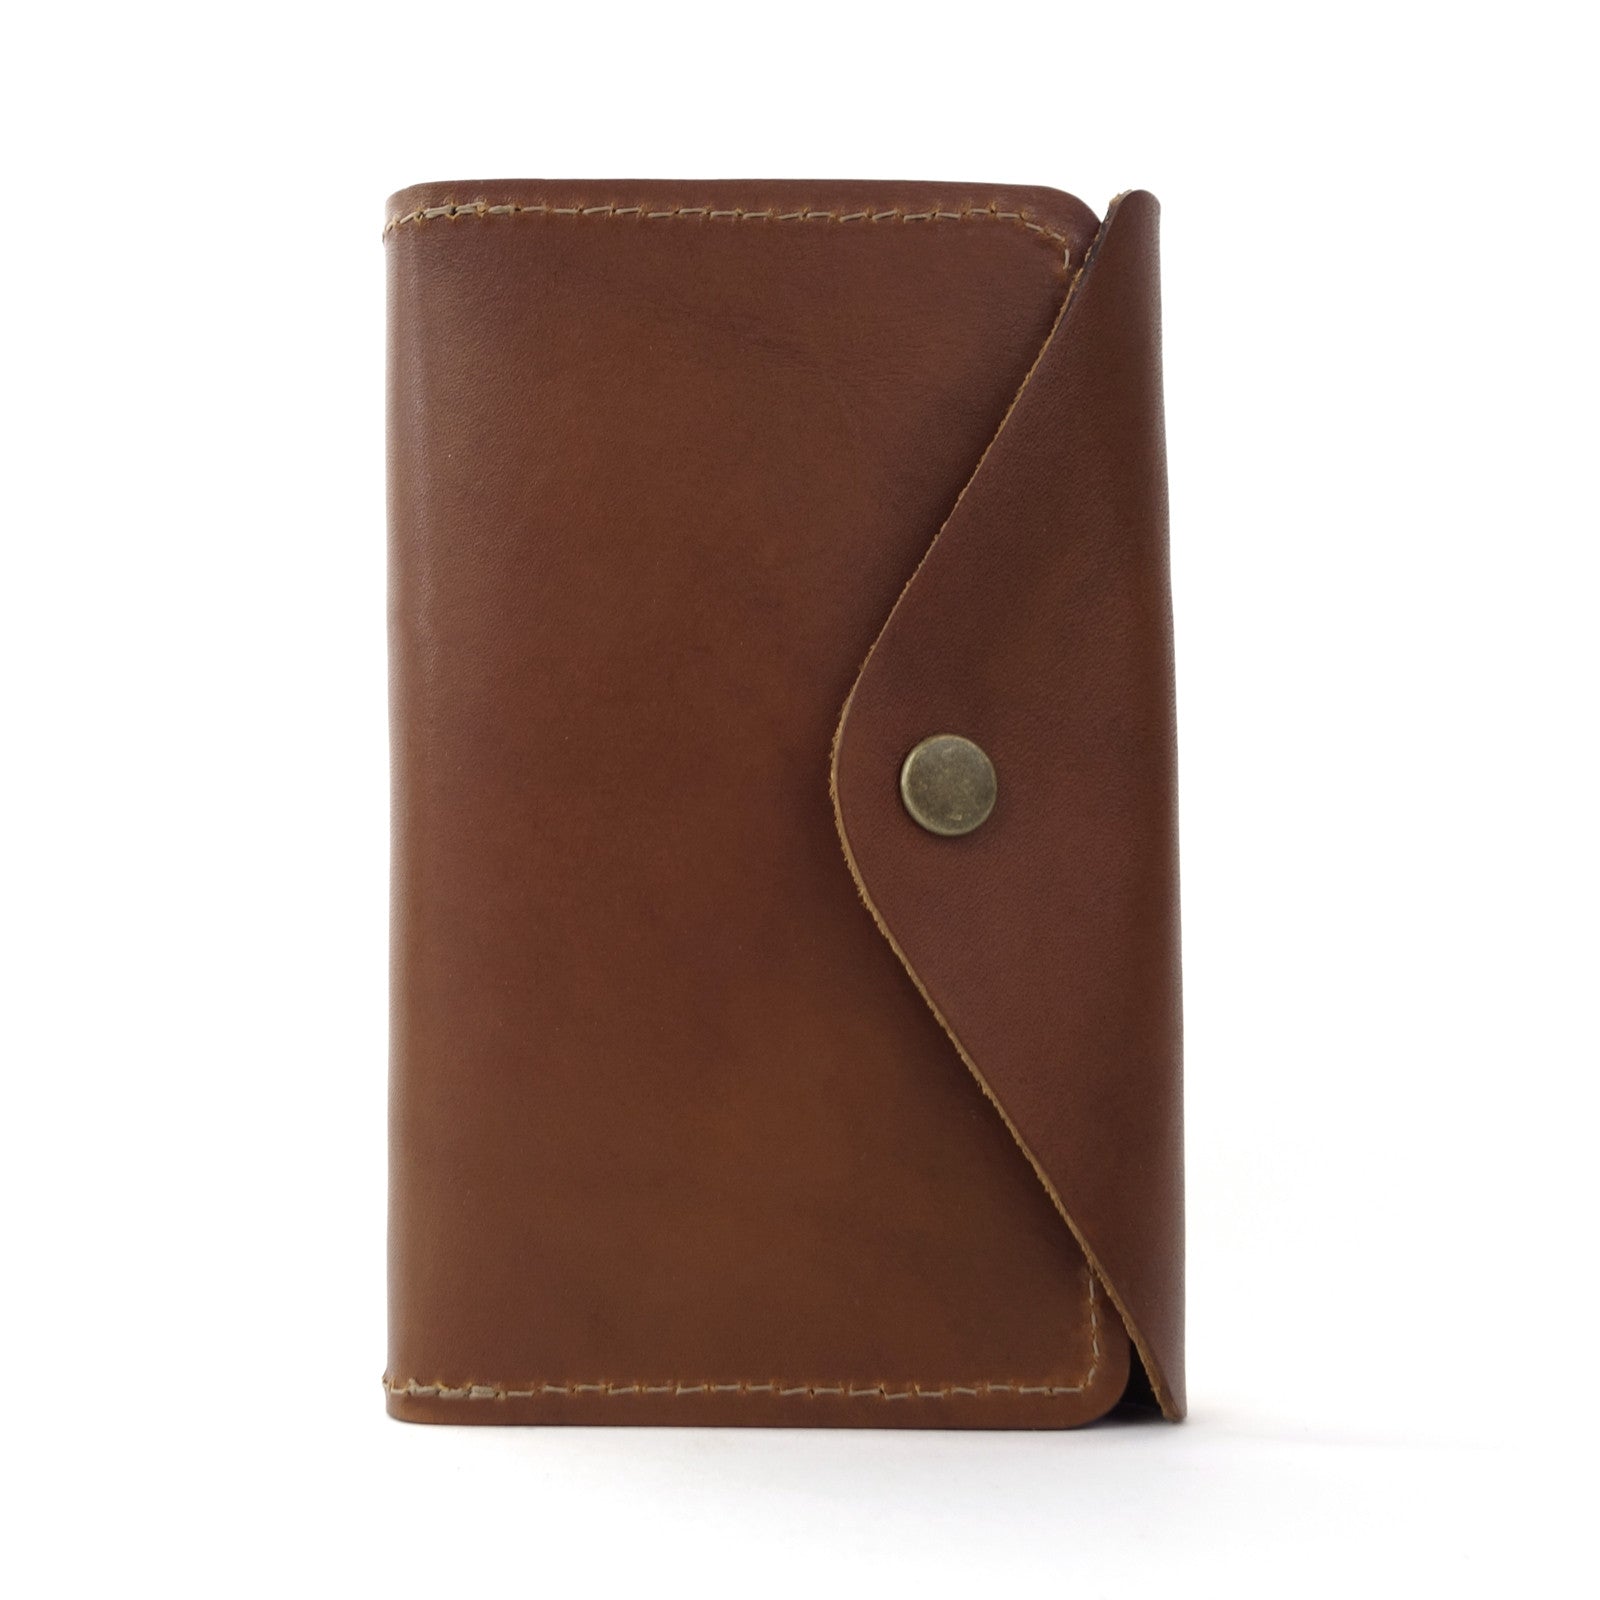 Passport wallet, leather wallet, notebook wallet, travel wallet, leather passport carrier, This product was brought to life for people who use their passport or sketchbook as a wallet. We ask that you value your belongings by placing them in the care this handcrafted passport/sketchbook wallet.